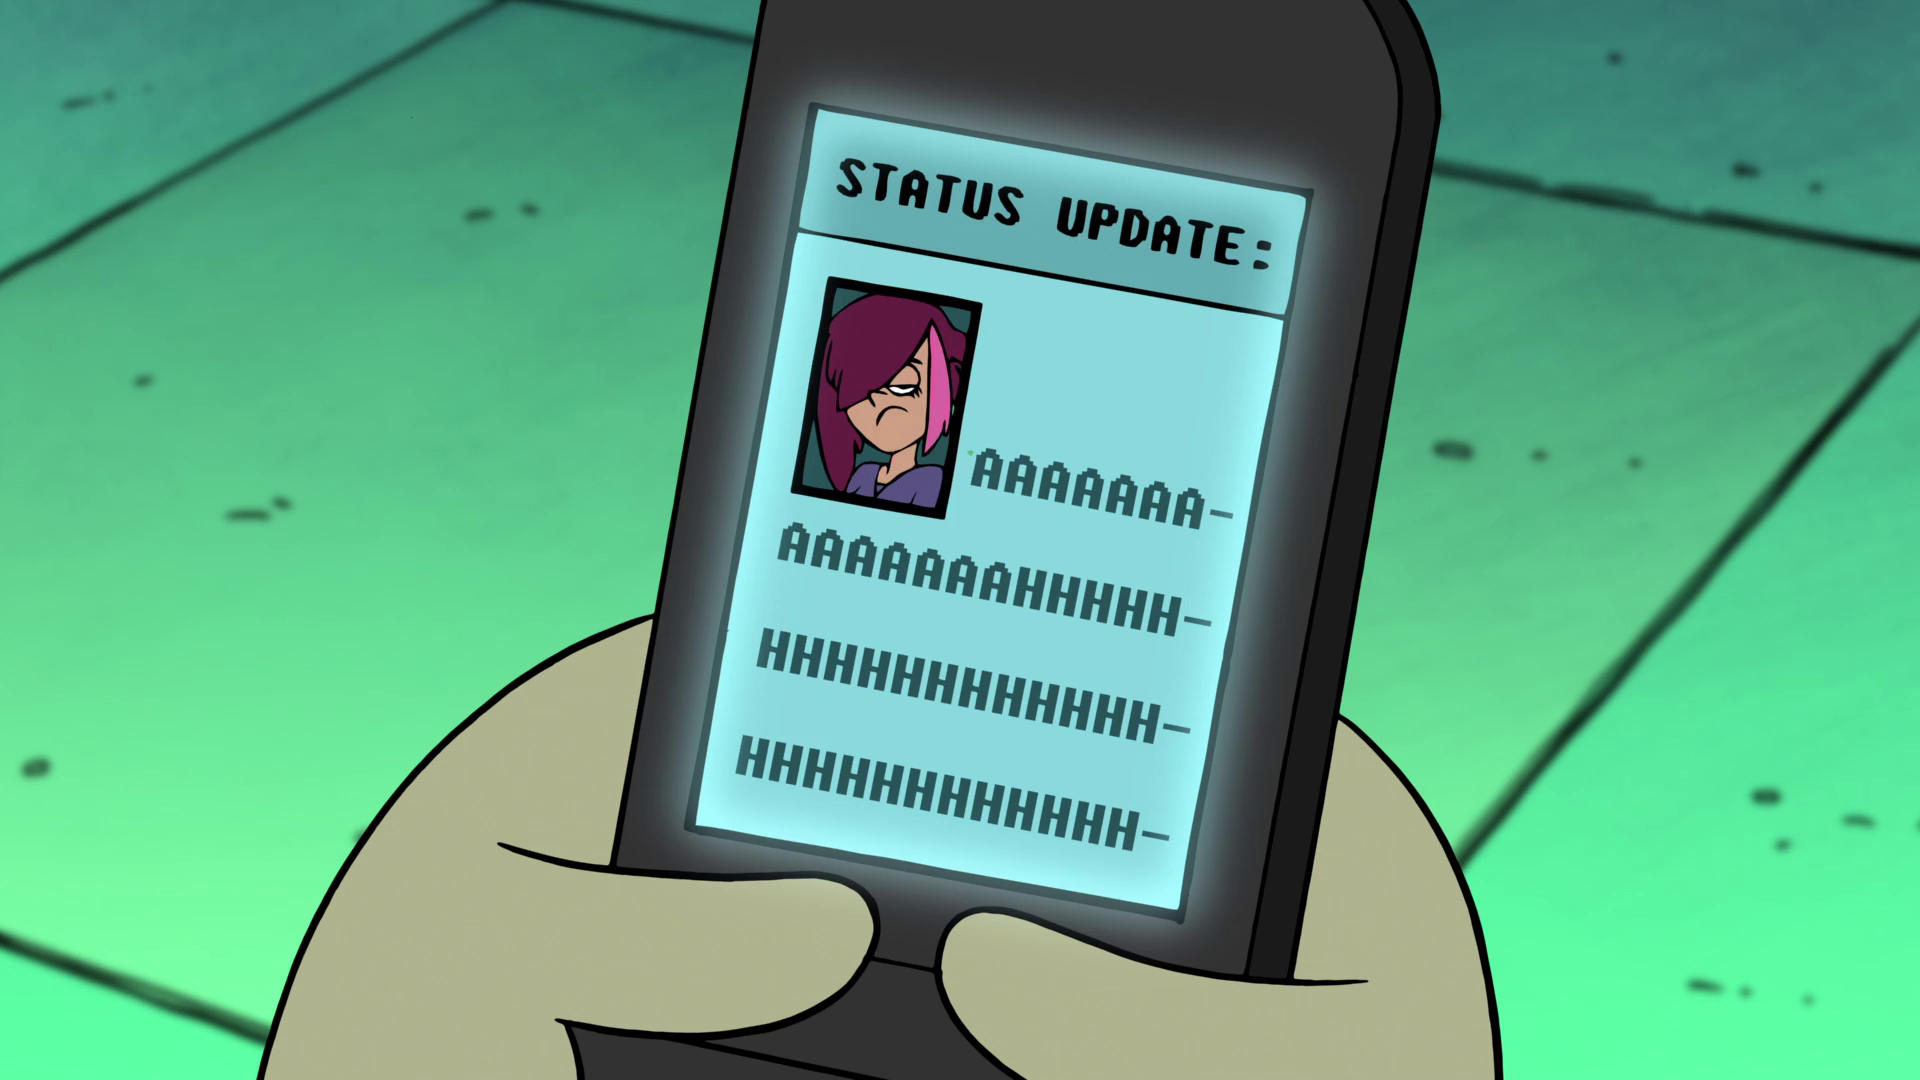 Status Update Png - S1E5 Status Update Tambry Pic.png, Transparent background PNG HD thumbnail